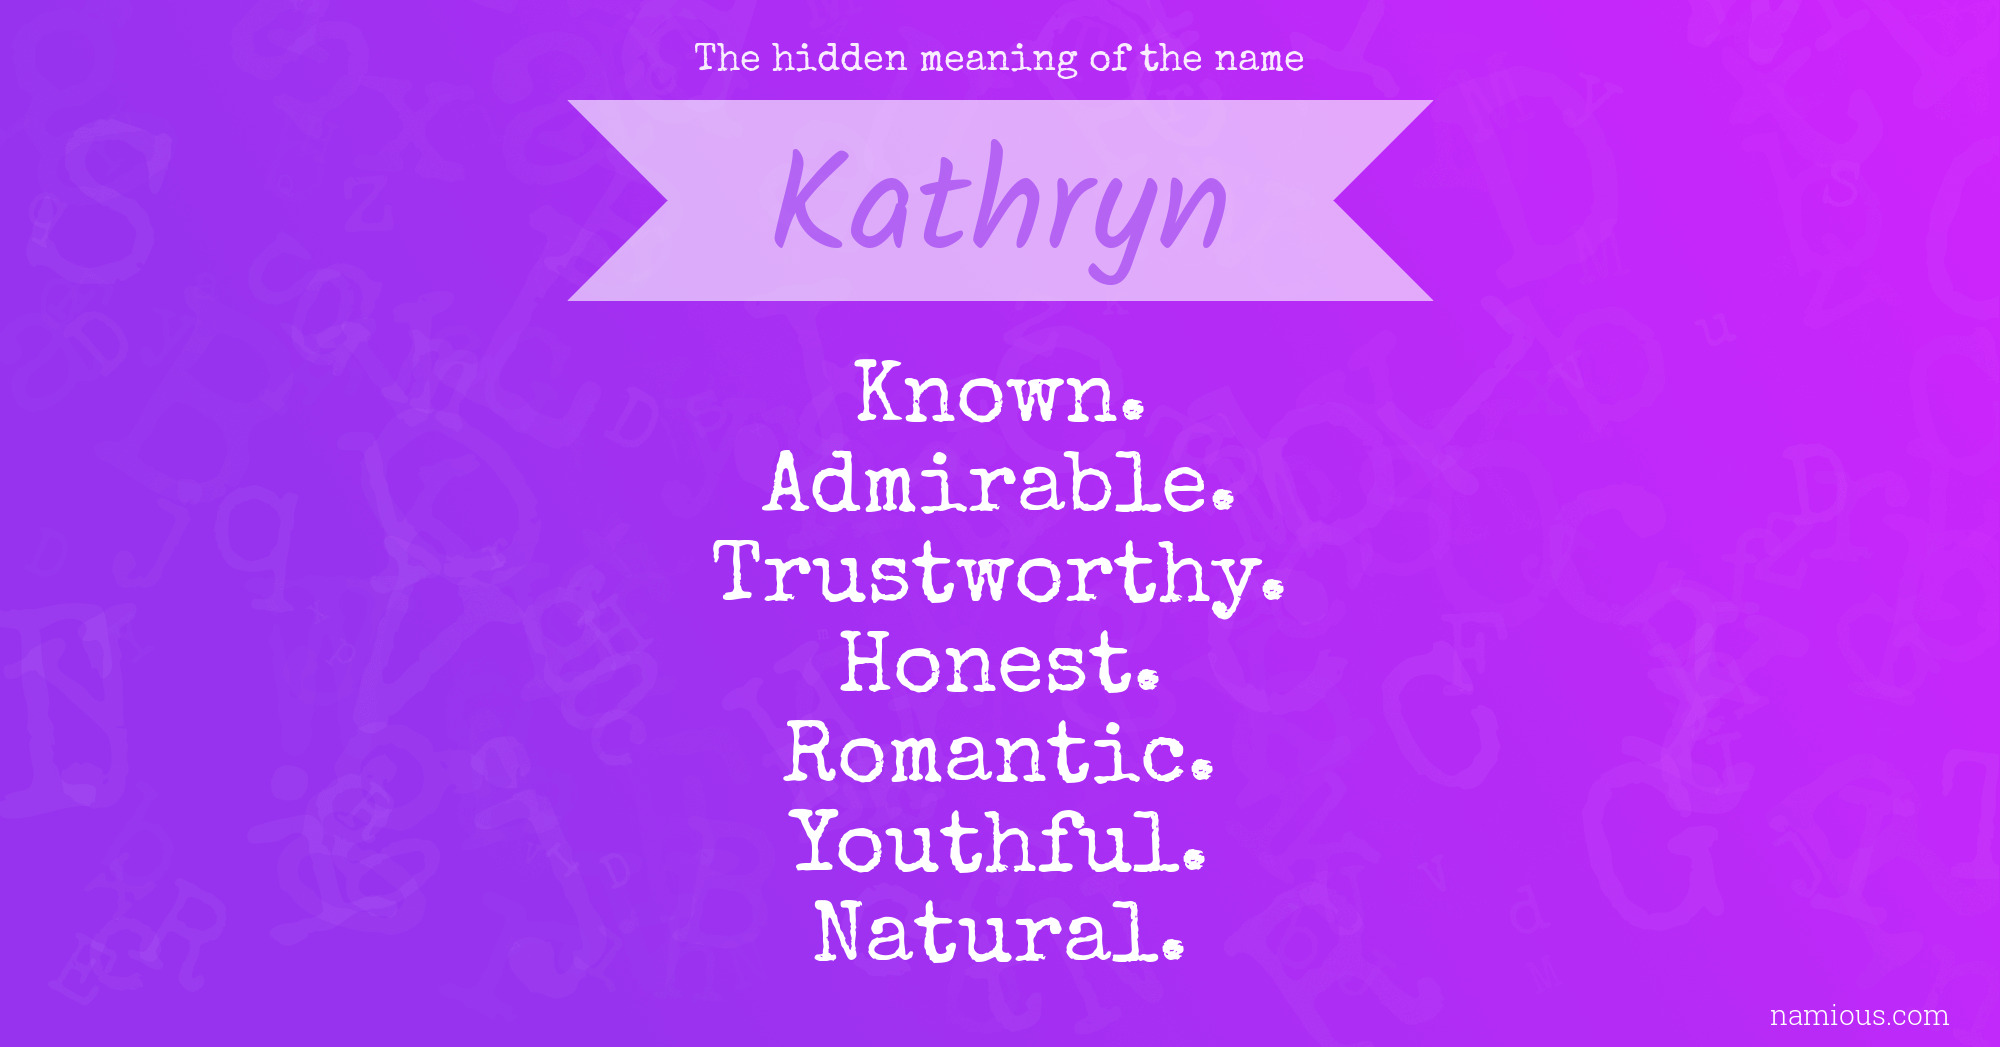 The hidden meaning of the name Kathryn